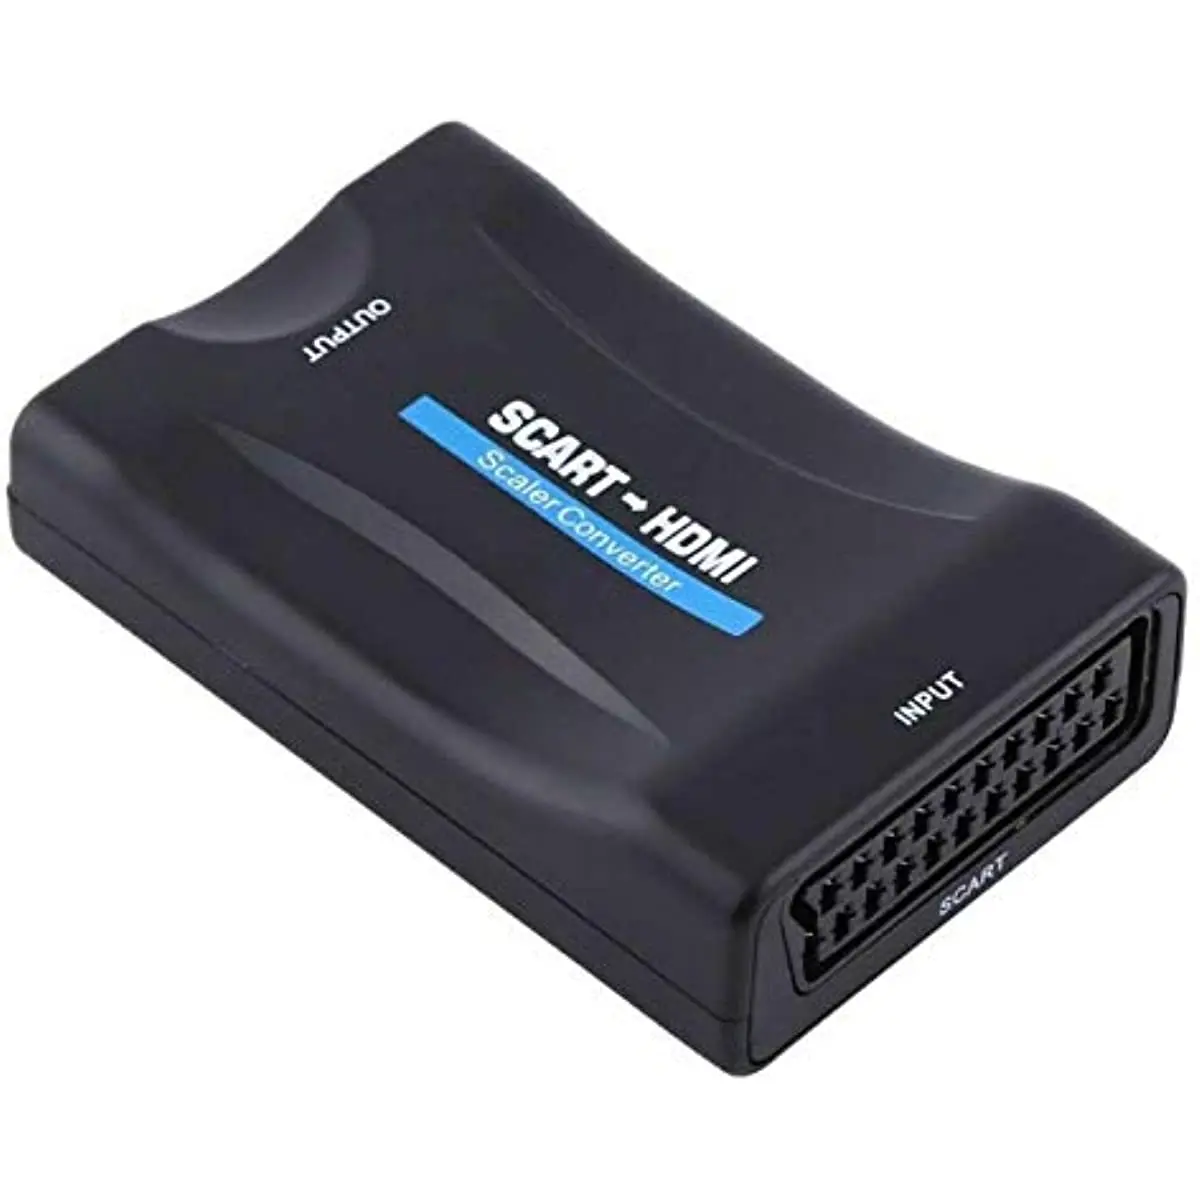 

SCART to HDMI Converter, Audio Video Converter Scaler Adapter with USB Power Cable Compatible Support 720p/1080P Output